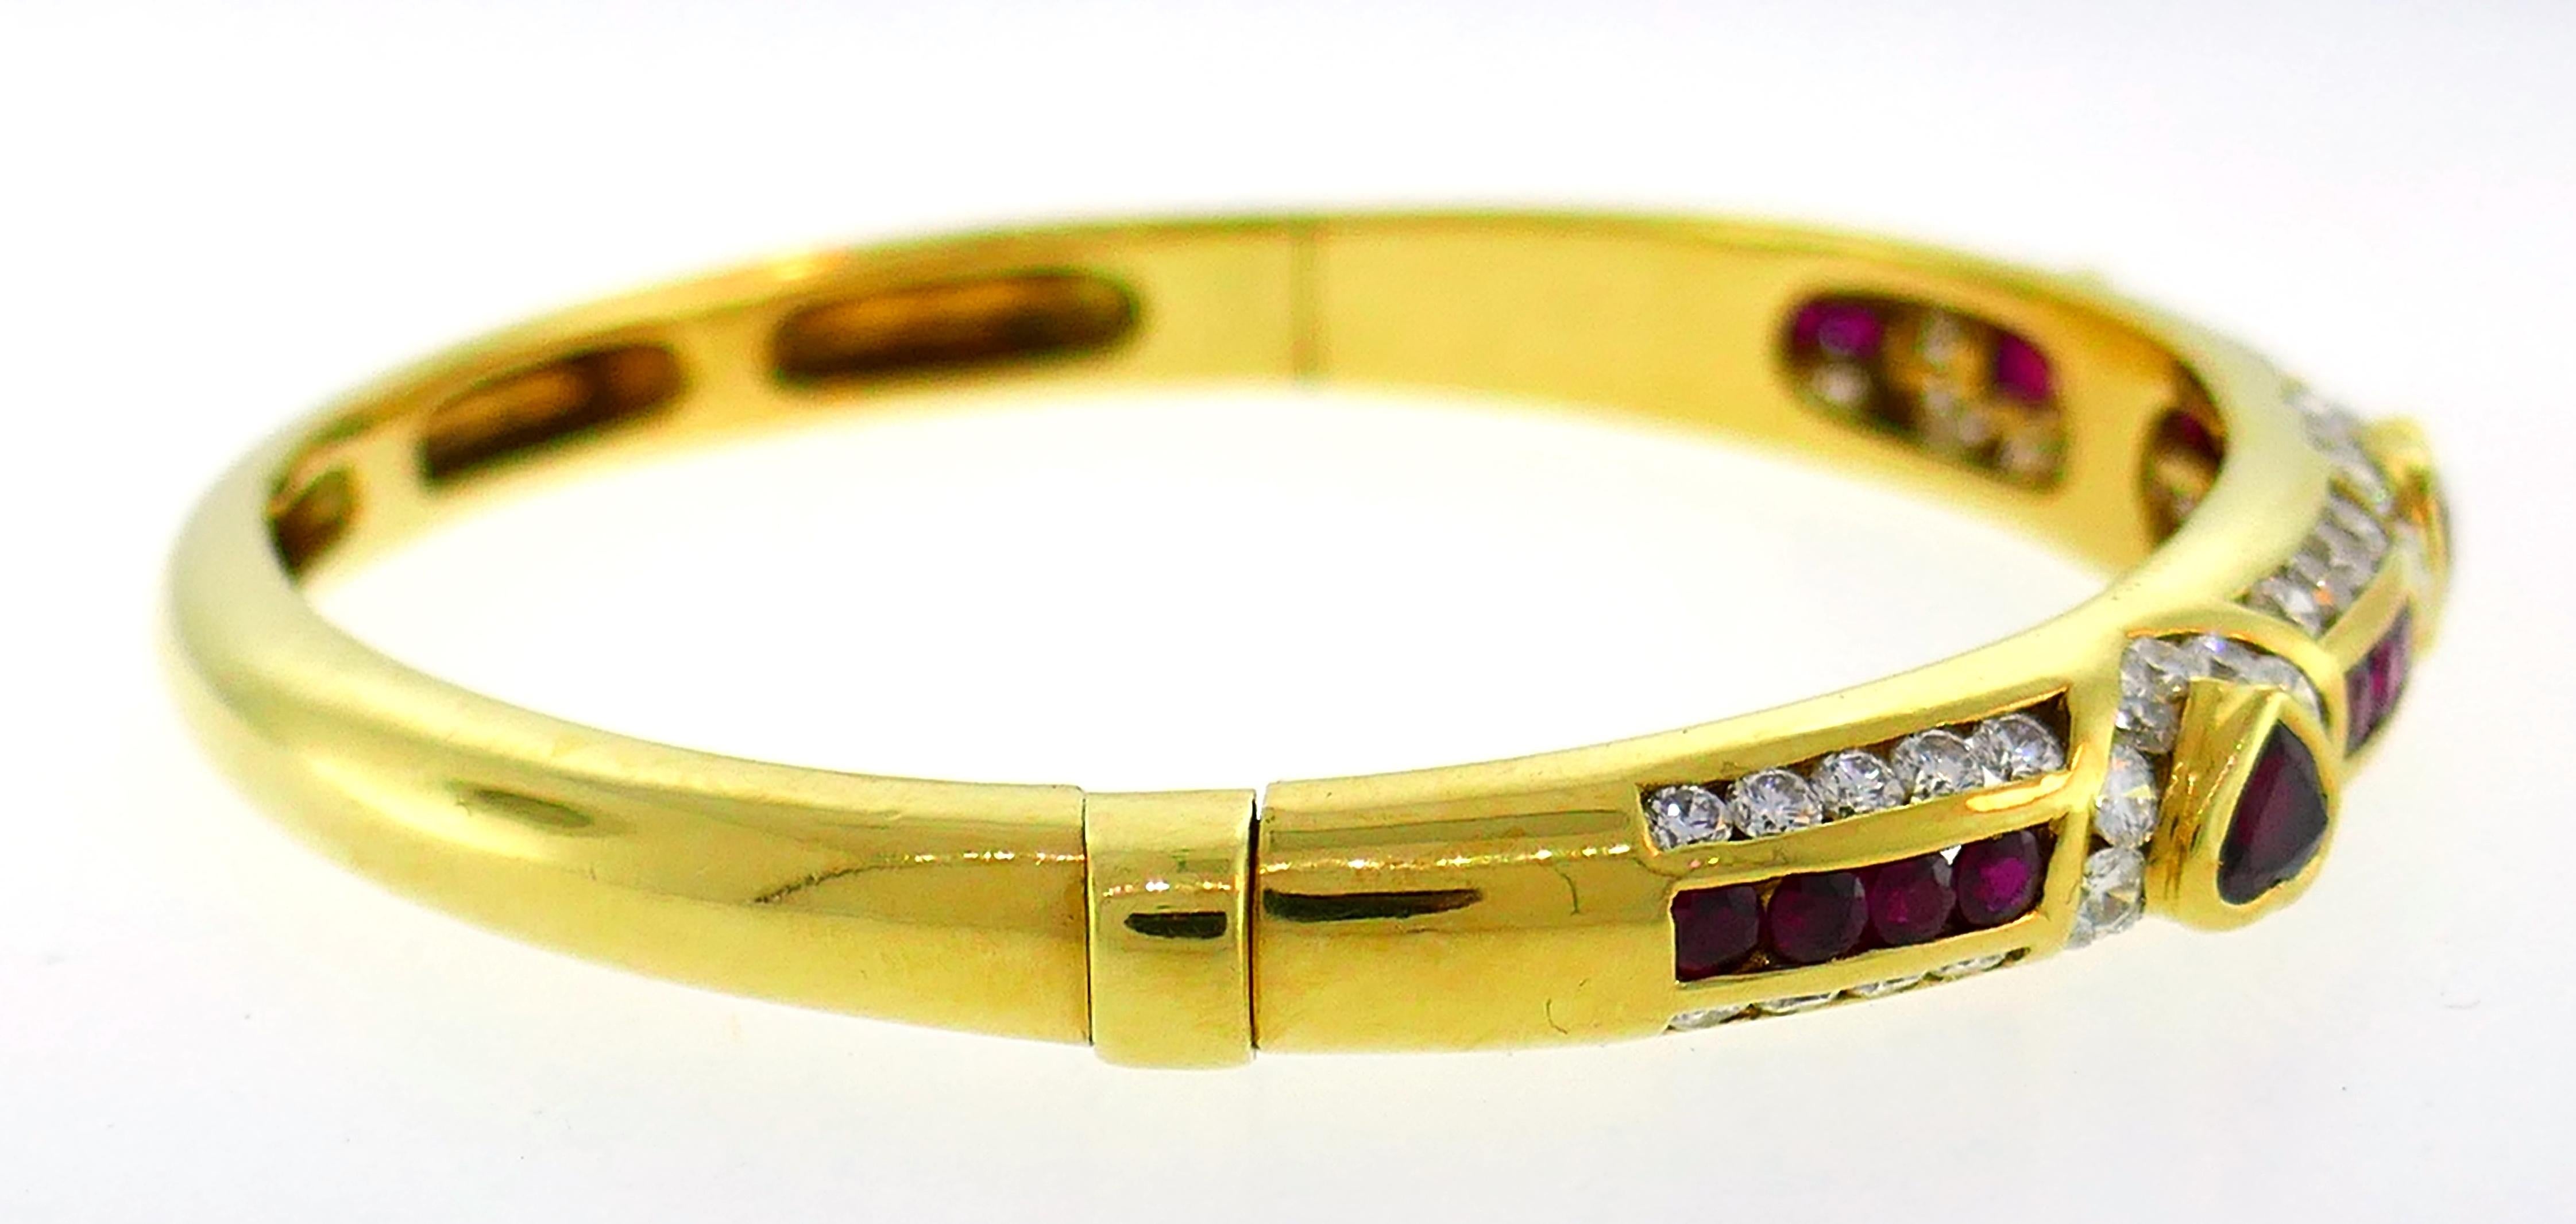 Fred Paris Heart Ruby Yellow Gold Bangle Bracelet with Diamond Accents, 1970s im Zustand „Gut“ in Beverly Hills, CA